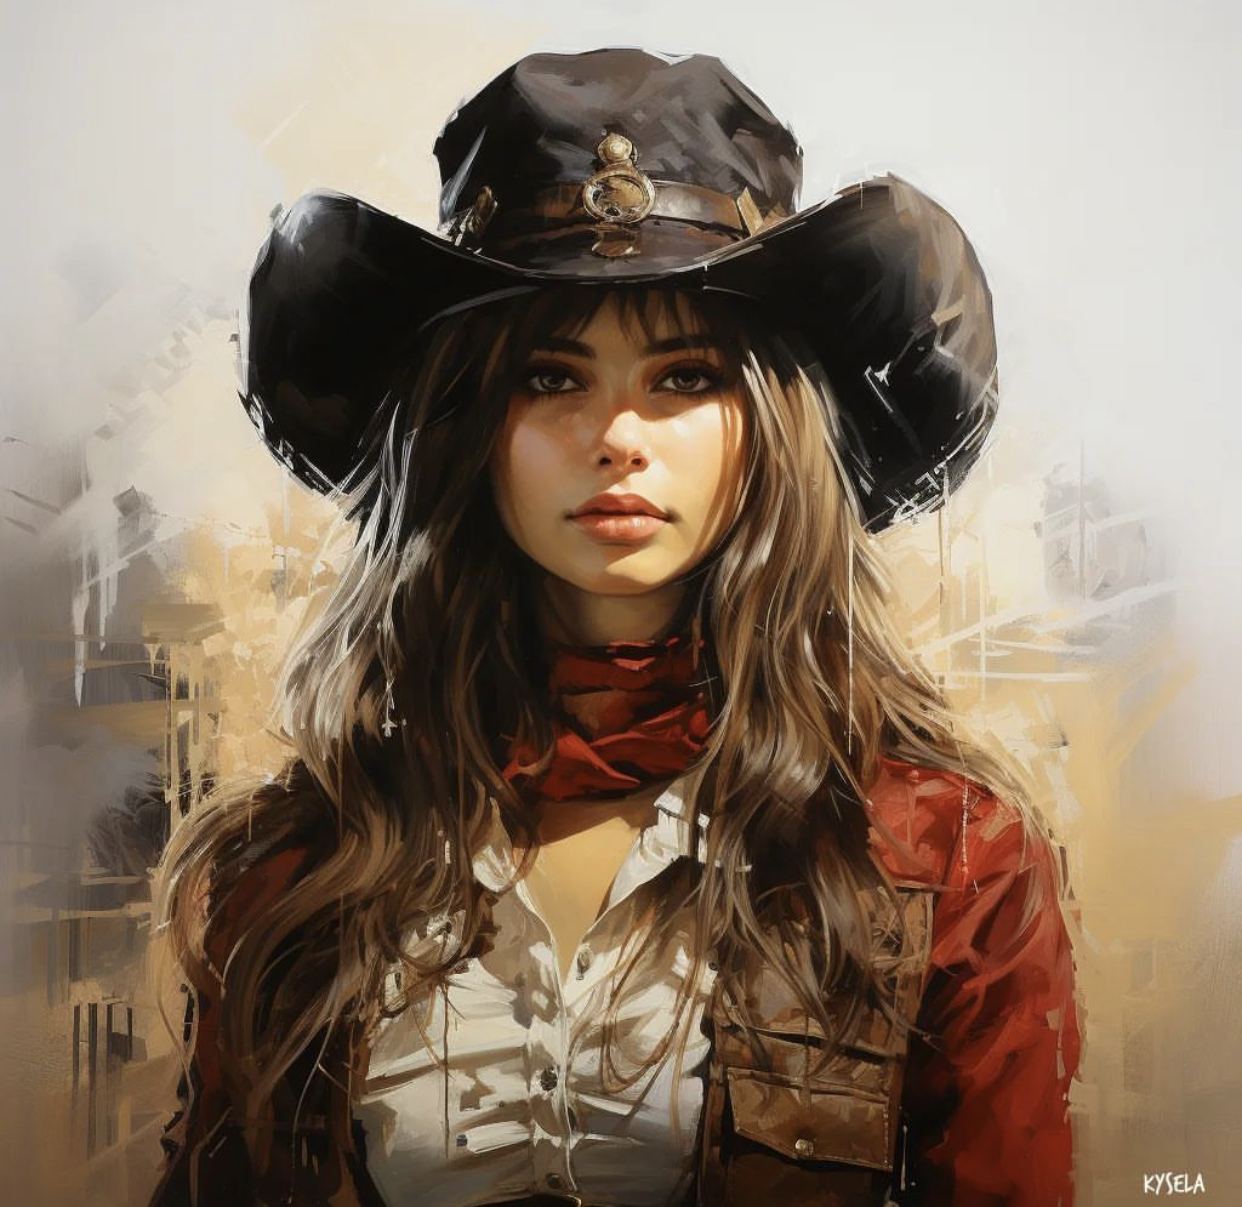 Young lady dressed as a cowgirl by eolmedillo on DeviantArt